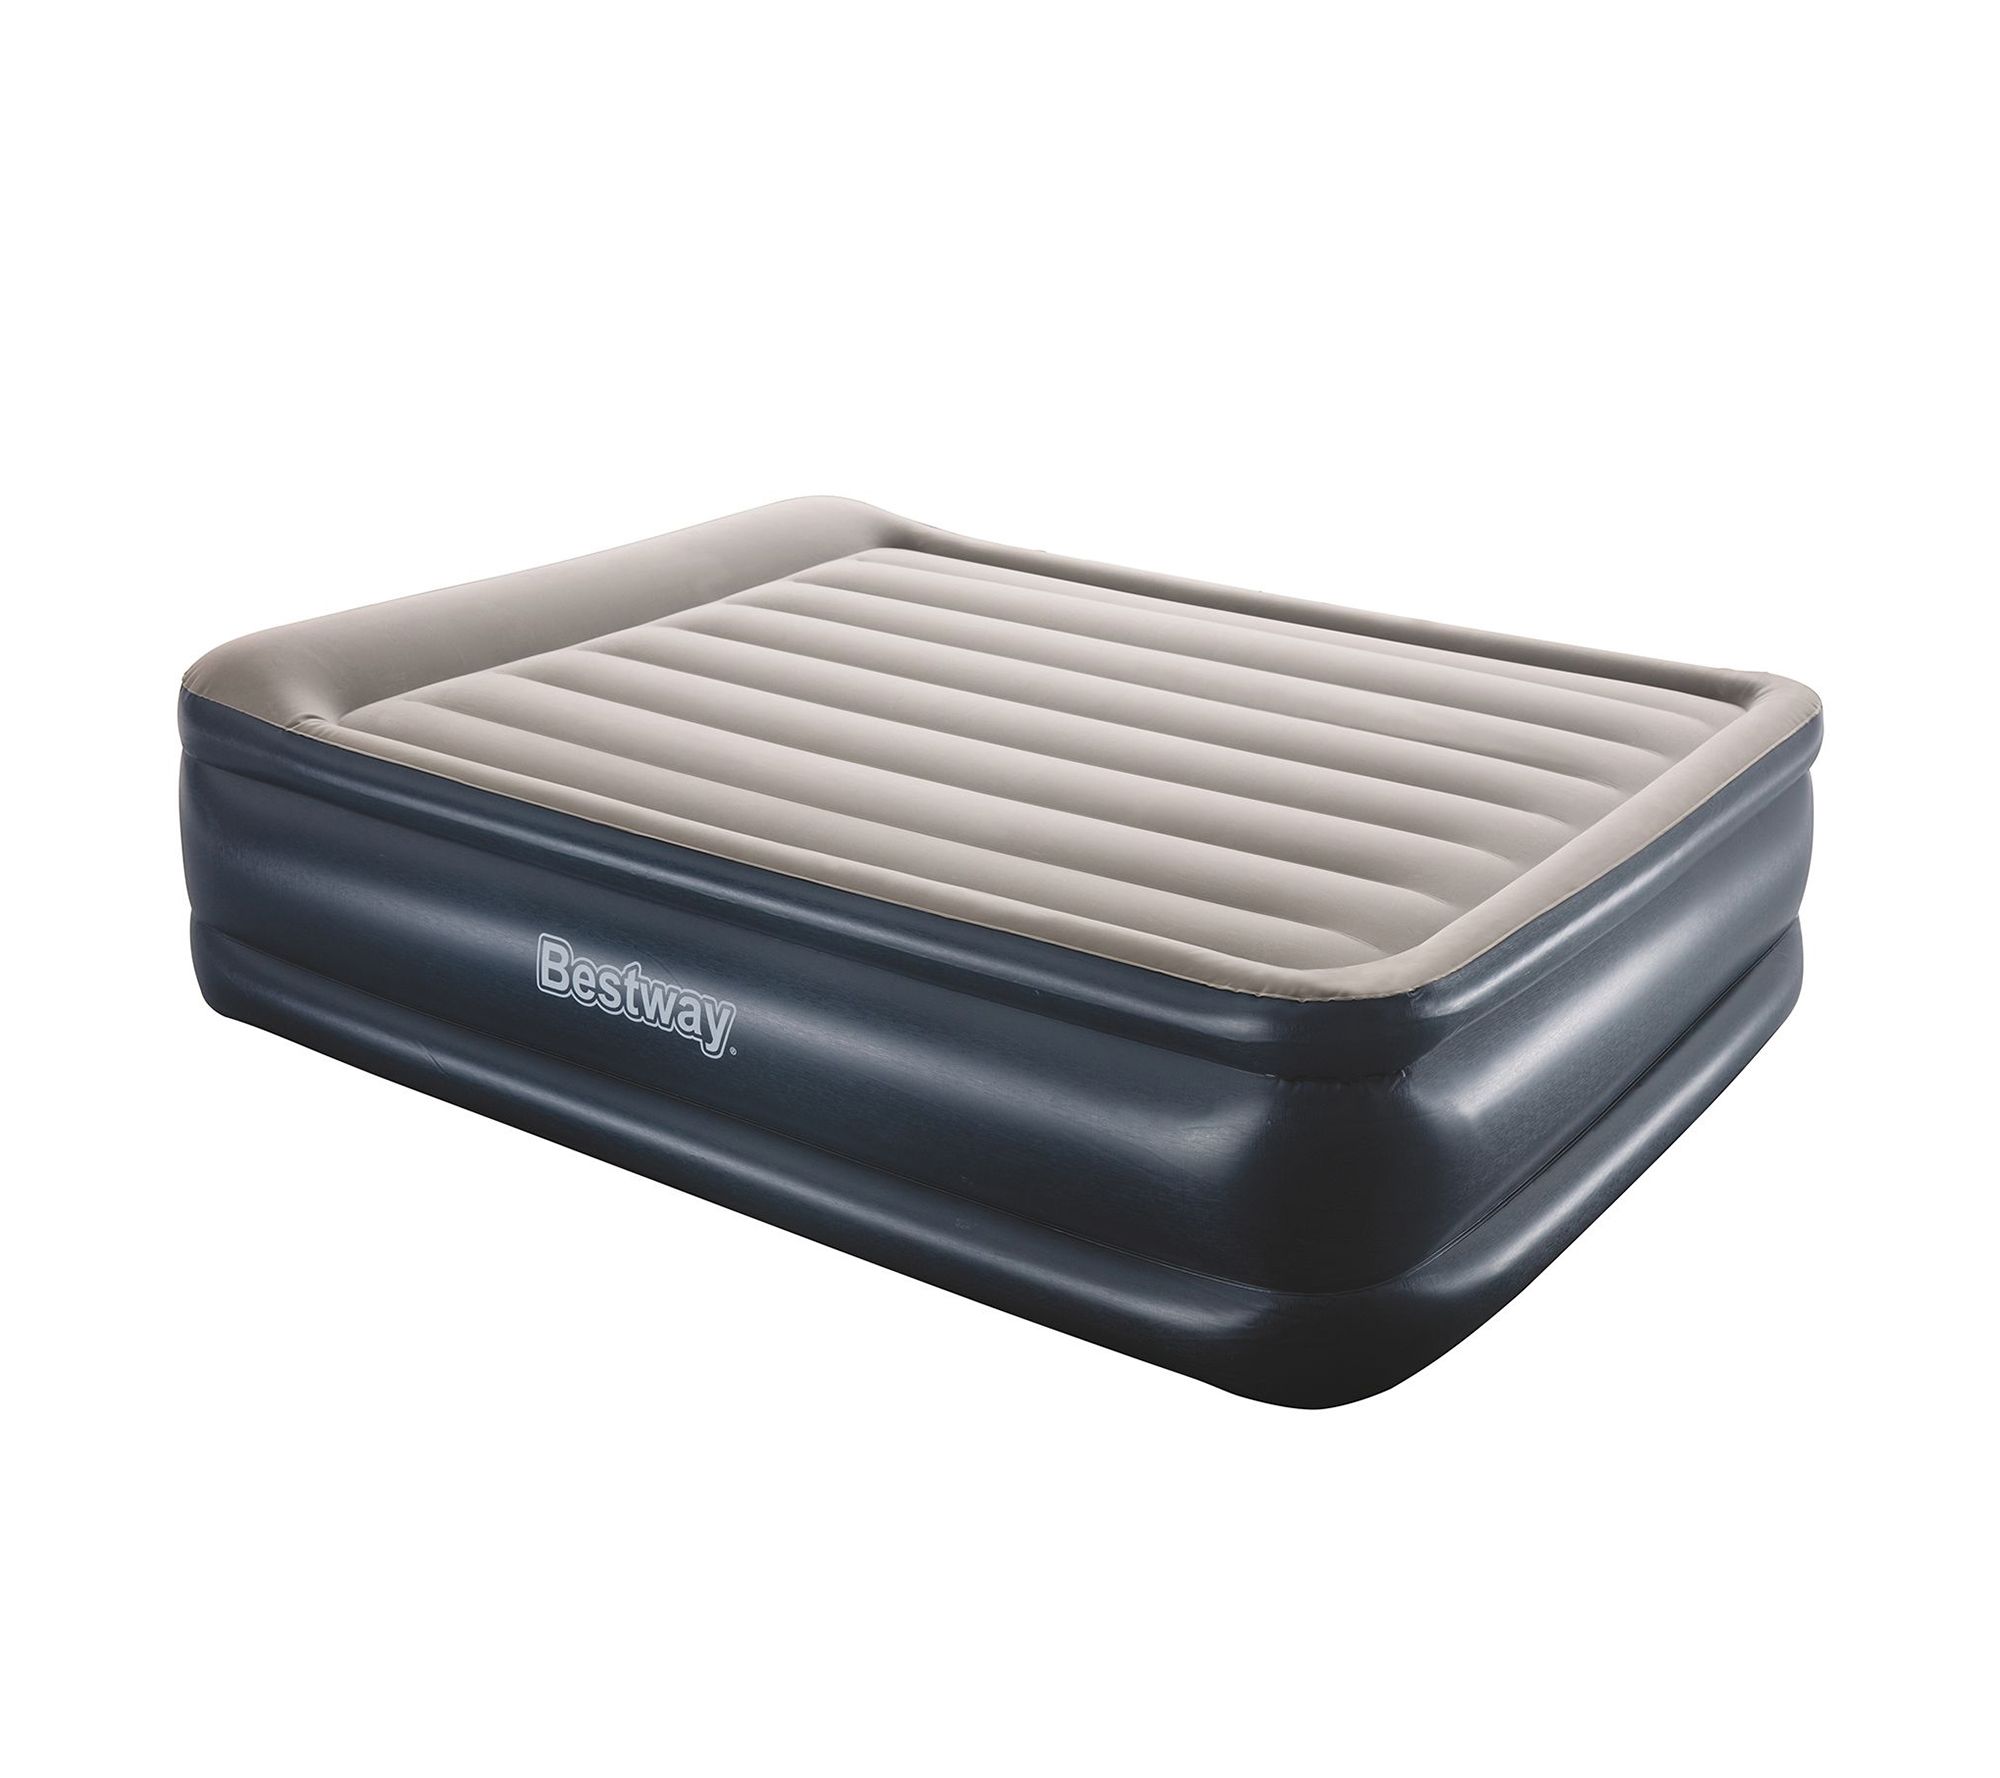 22" Tritech Airbed with Built-inAC Pump